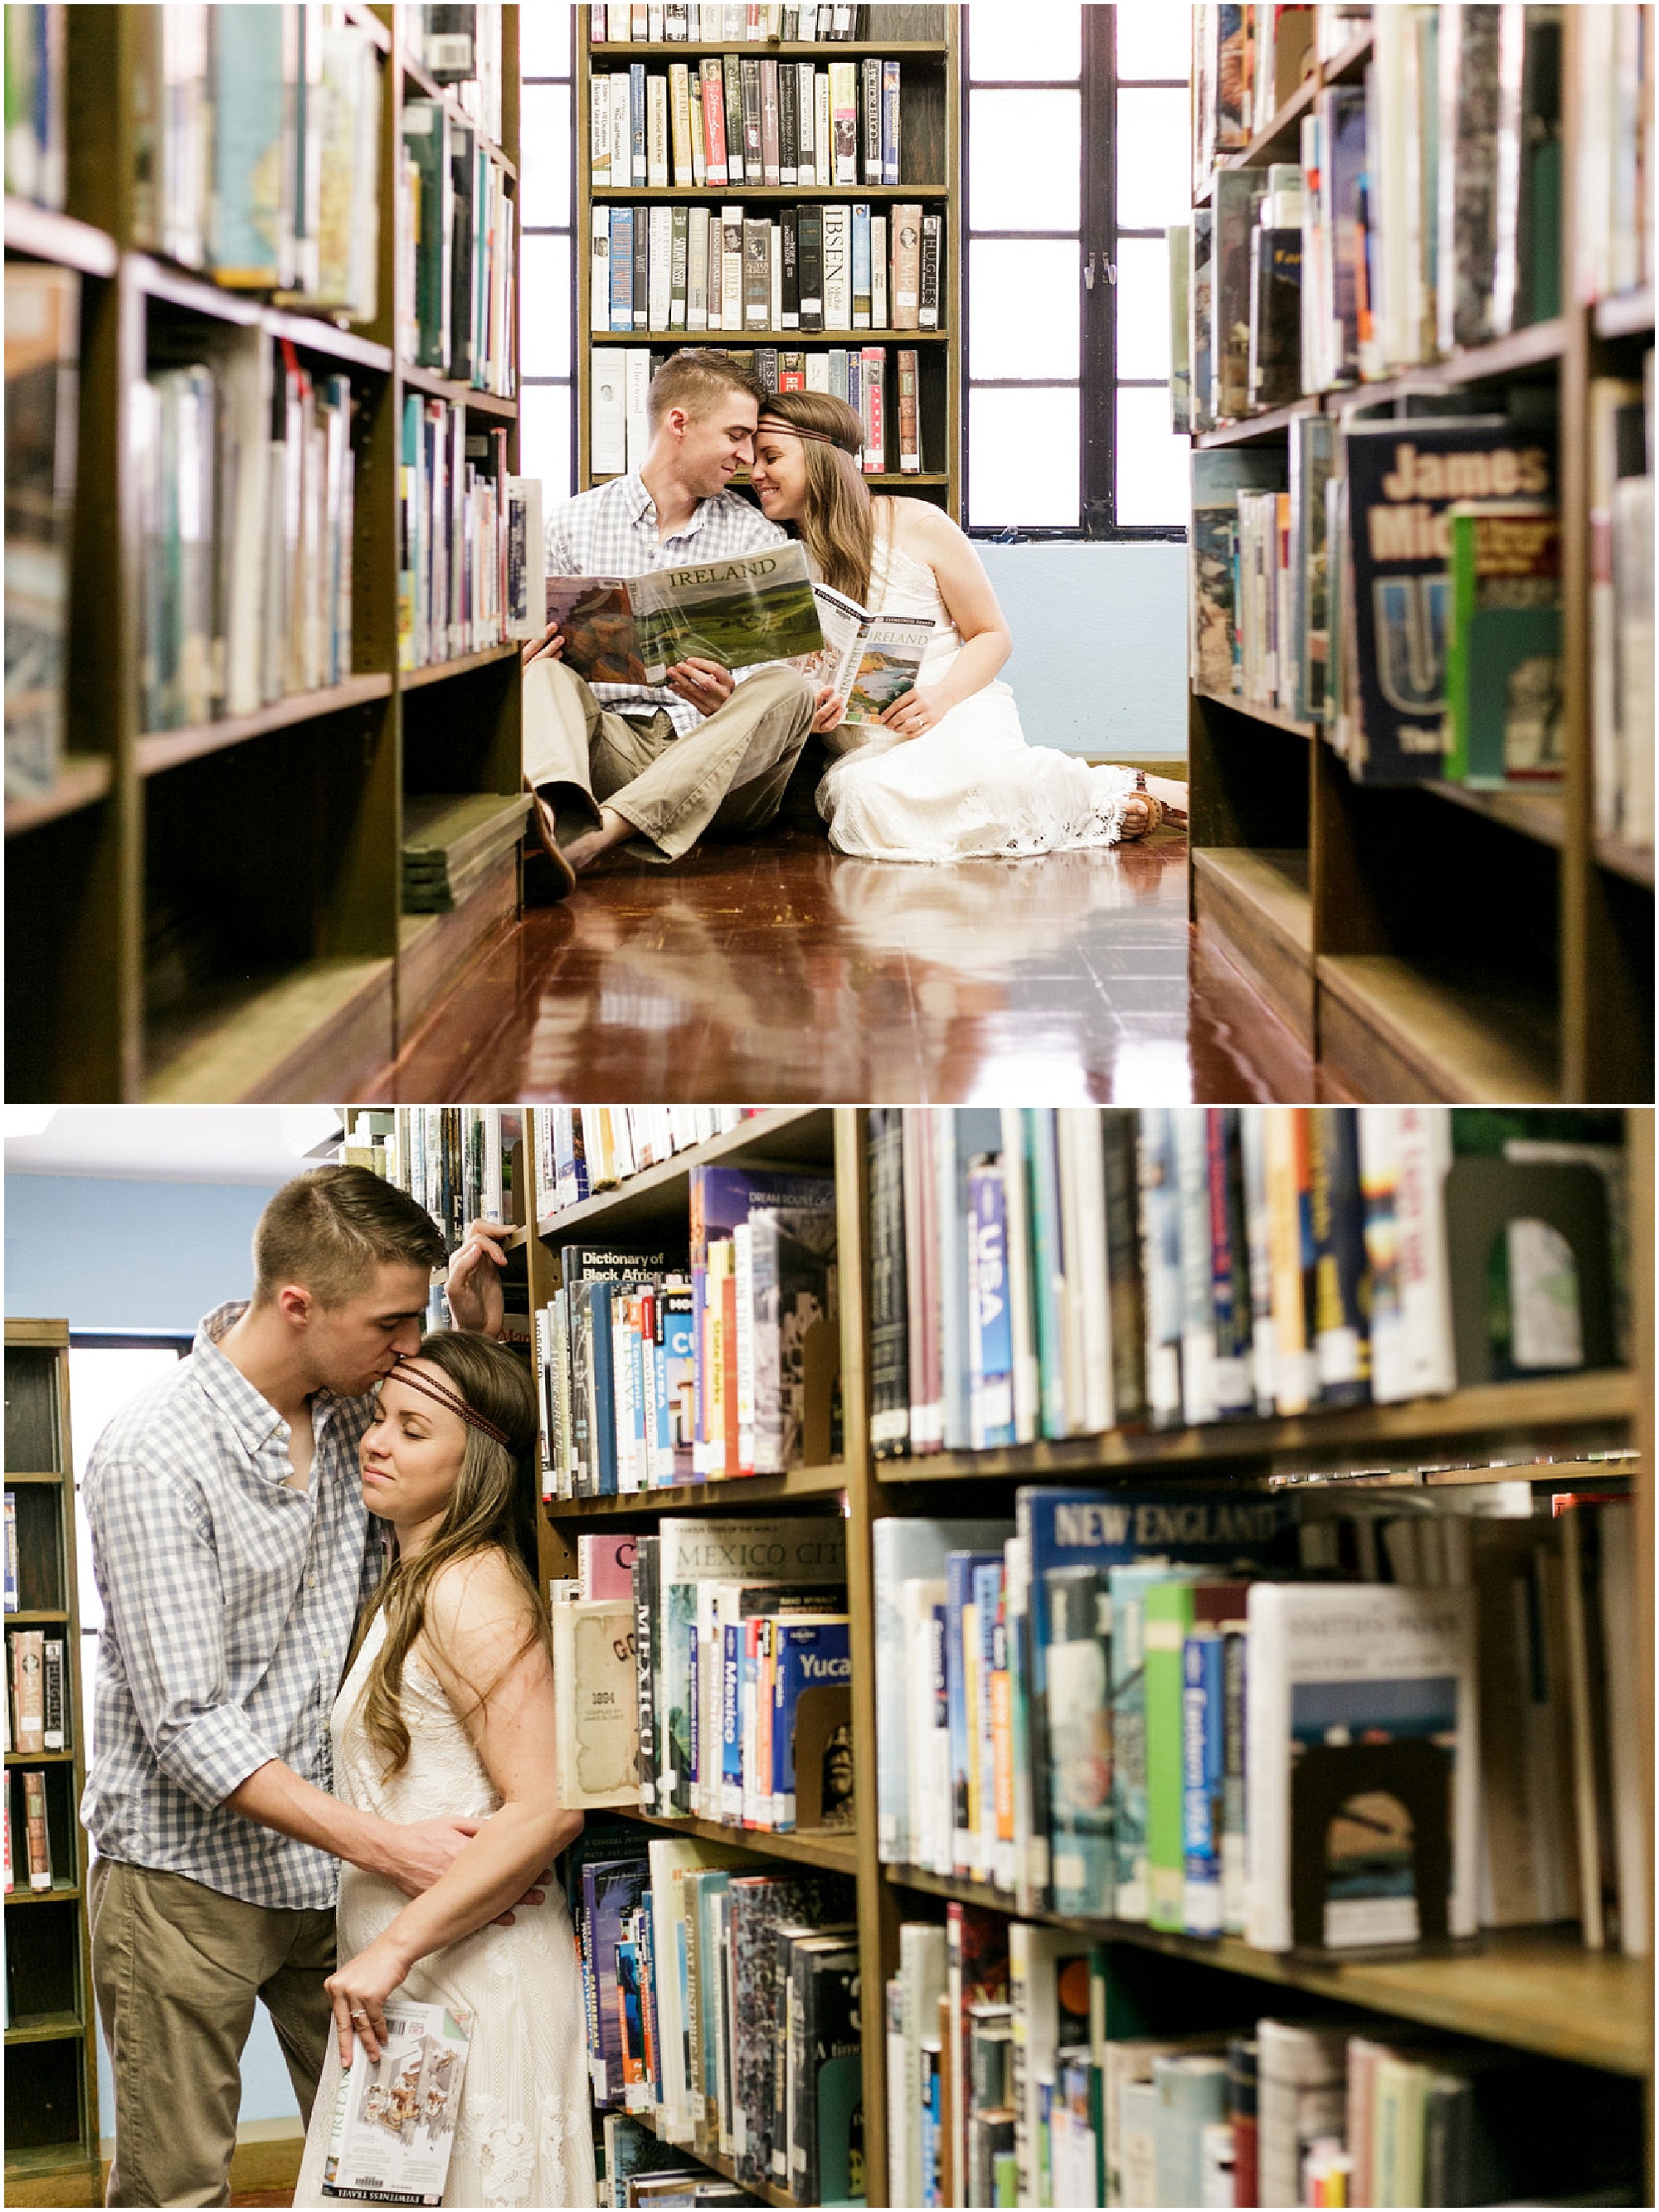 Engagement session couple enjoying reading books in a library.